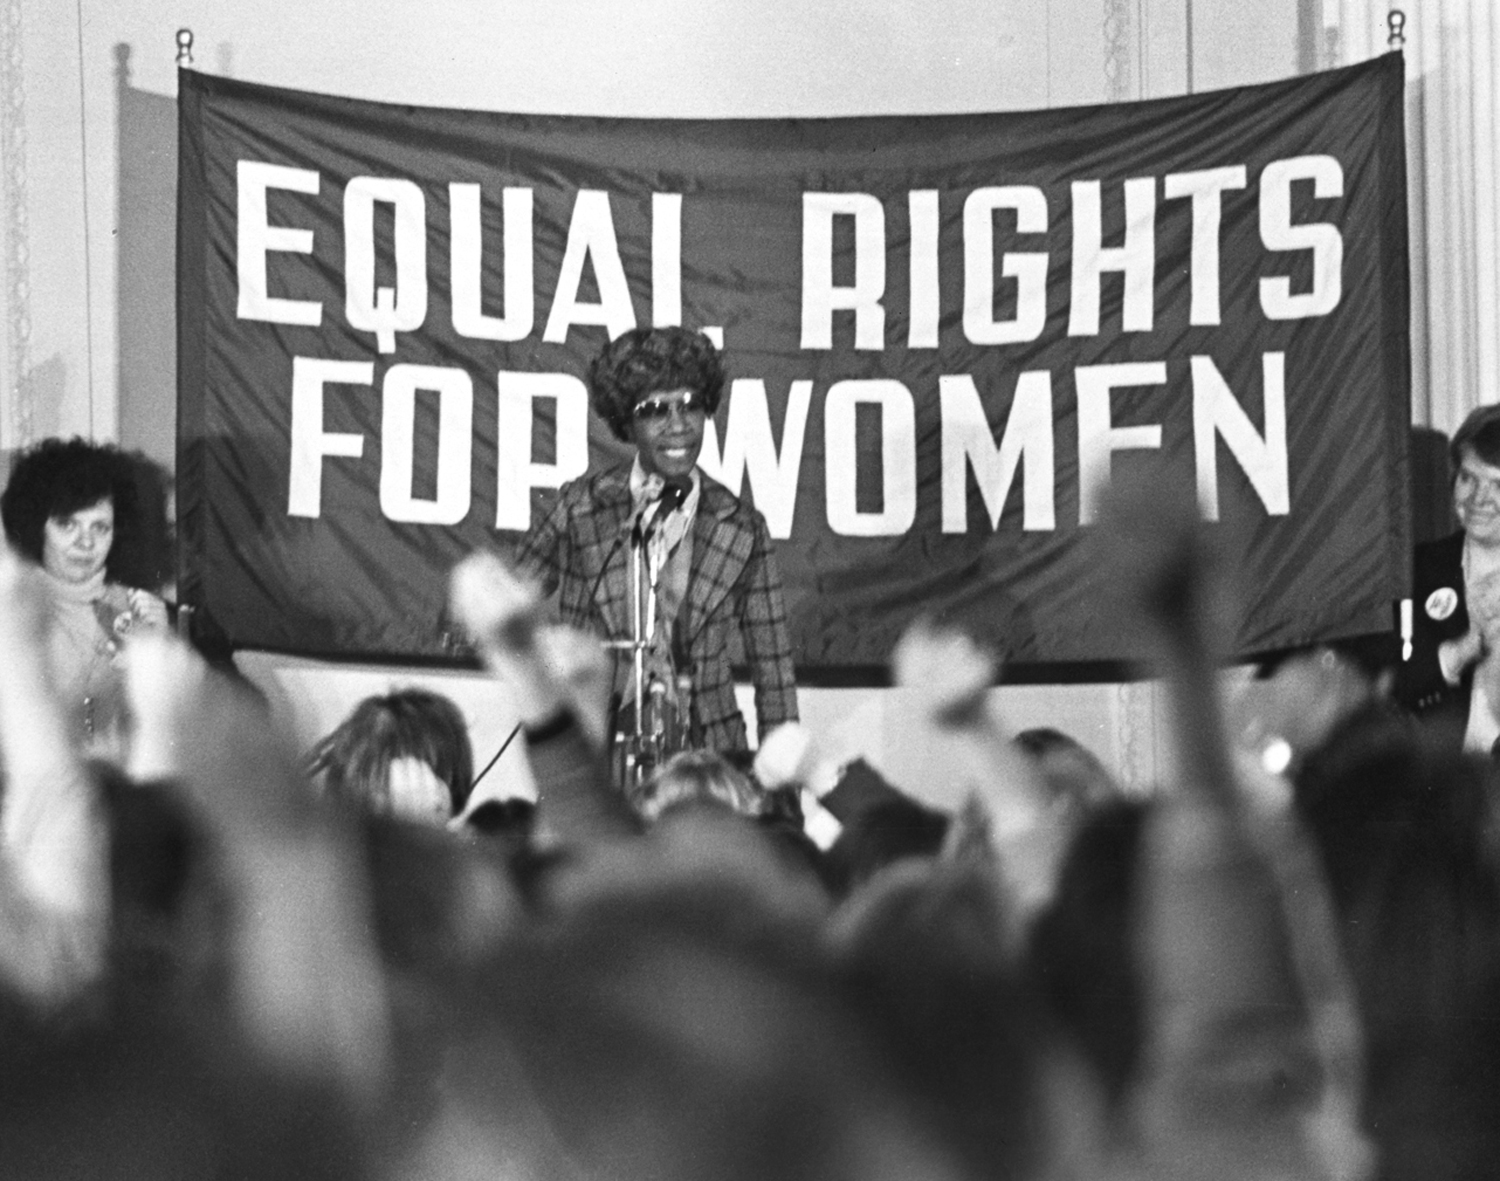 Shirley Chisholm speaks before a crowd and stands in front of the sign that reads equal rights for women.